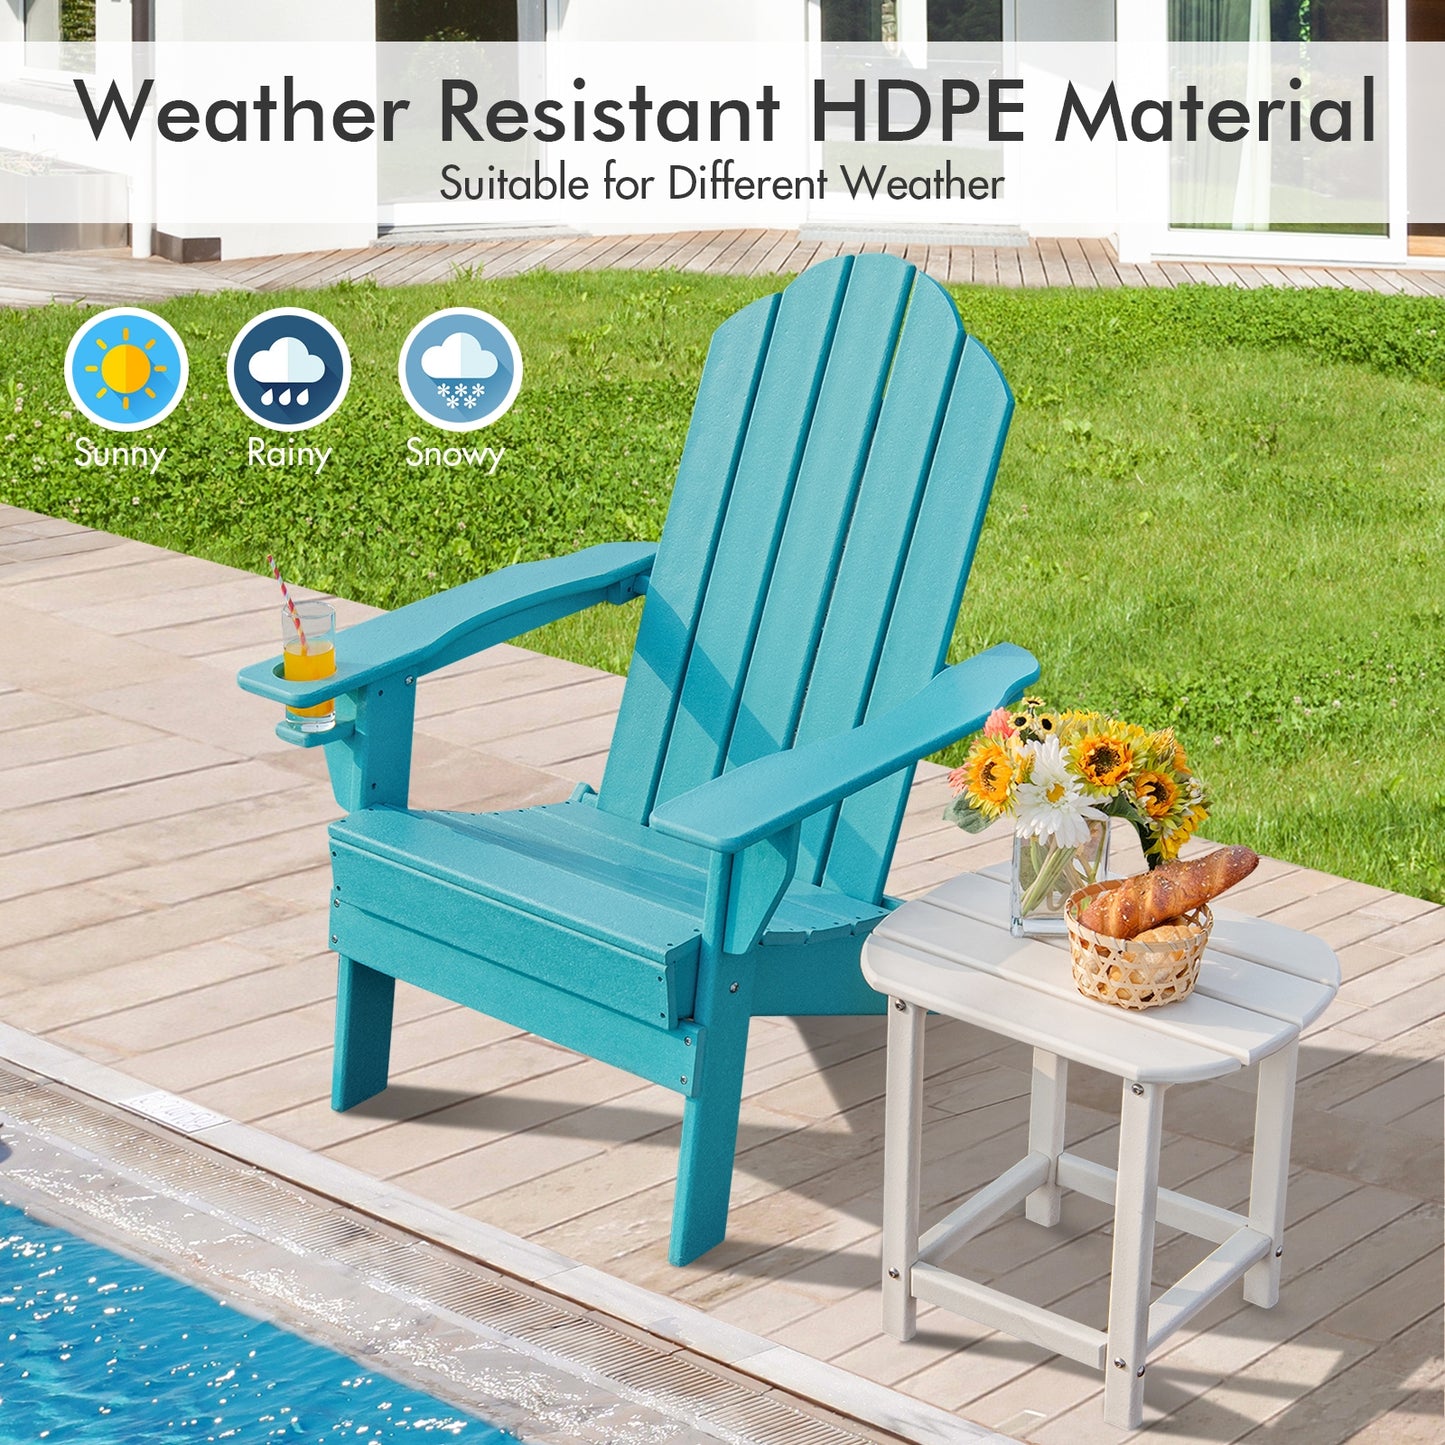 Foldable Weather Resistant Patio Chair with Built-in Cup Holder-Turquoise